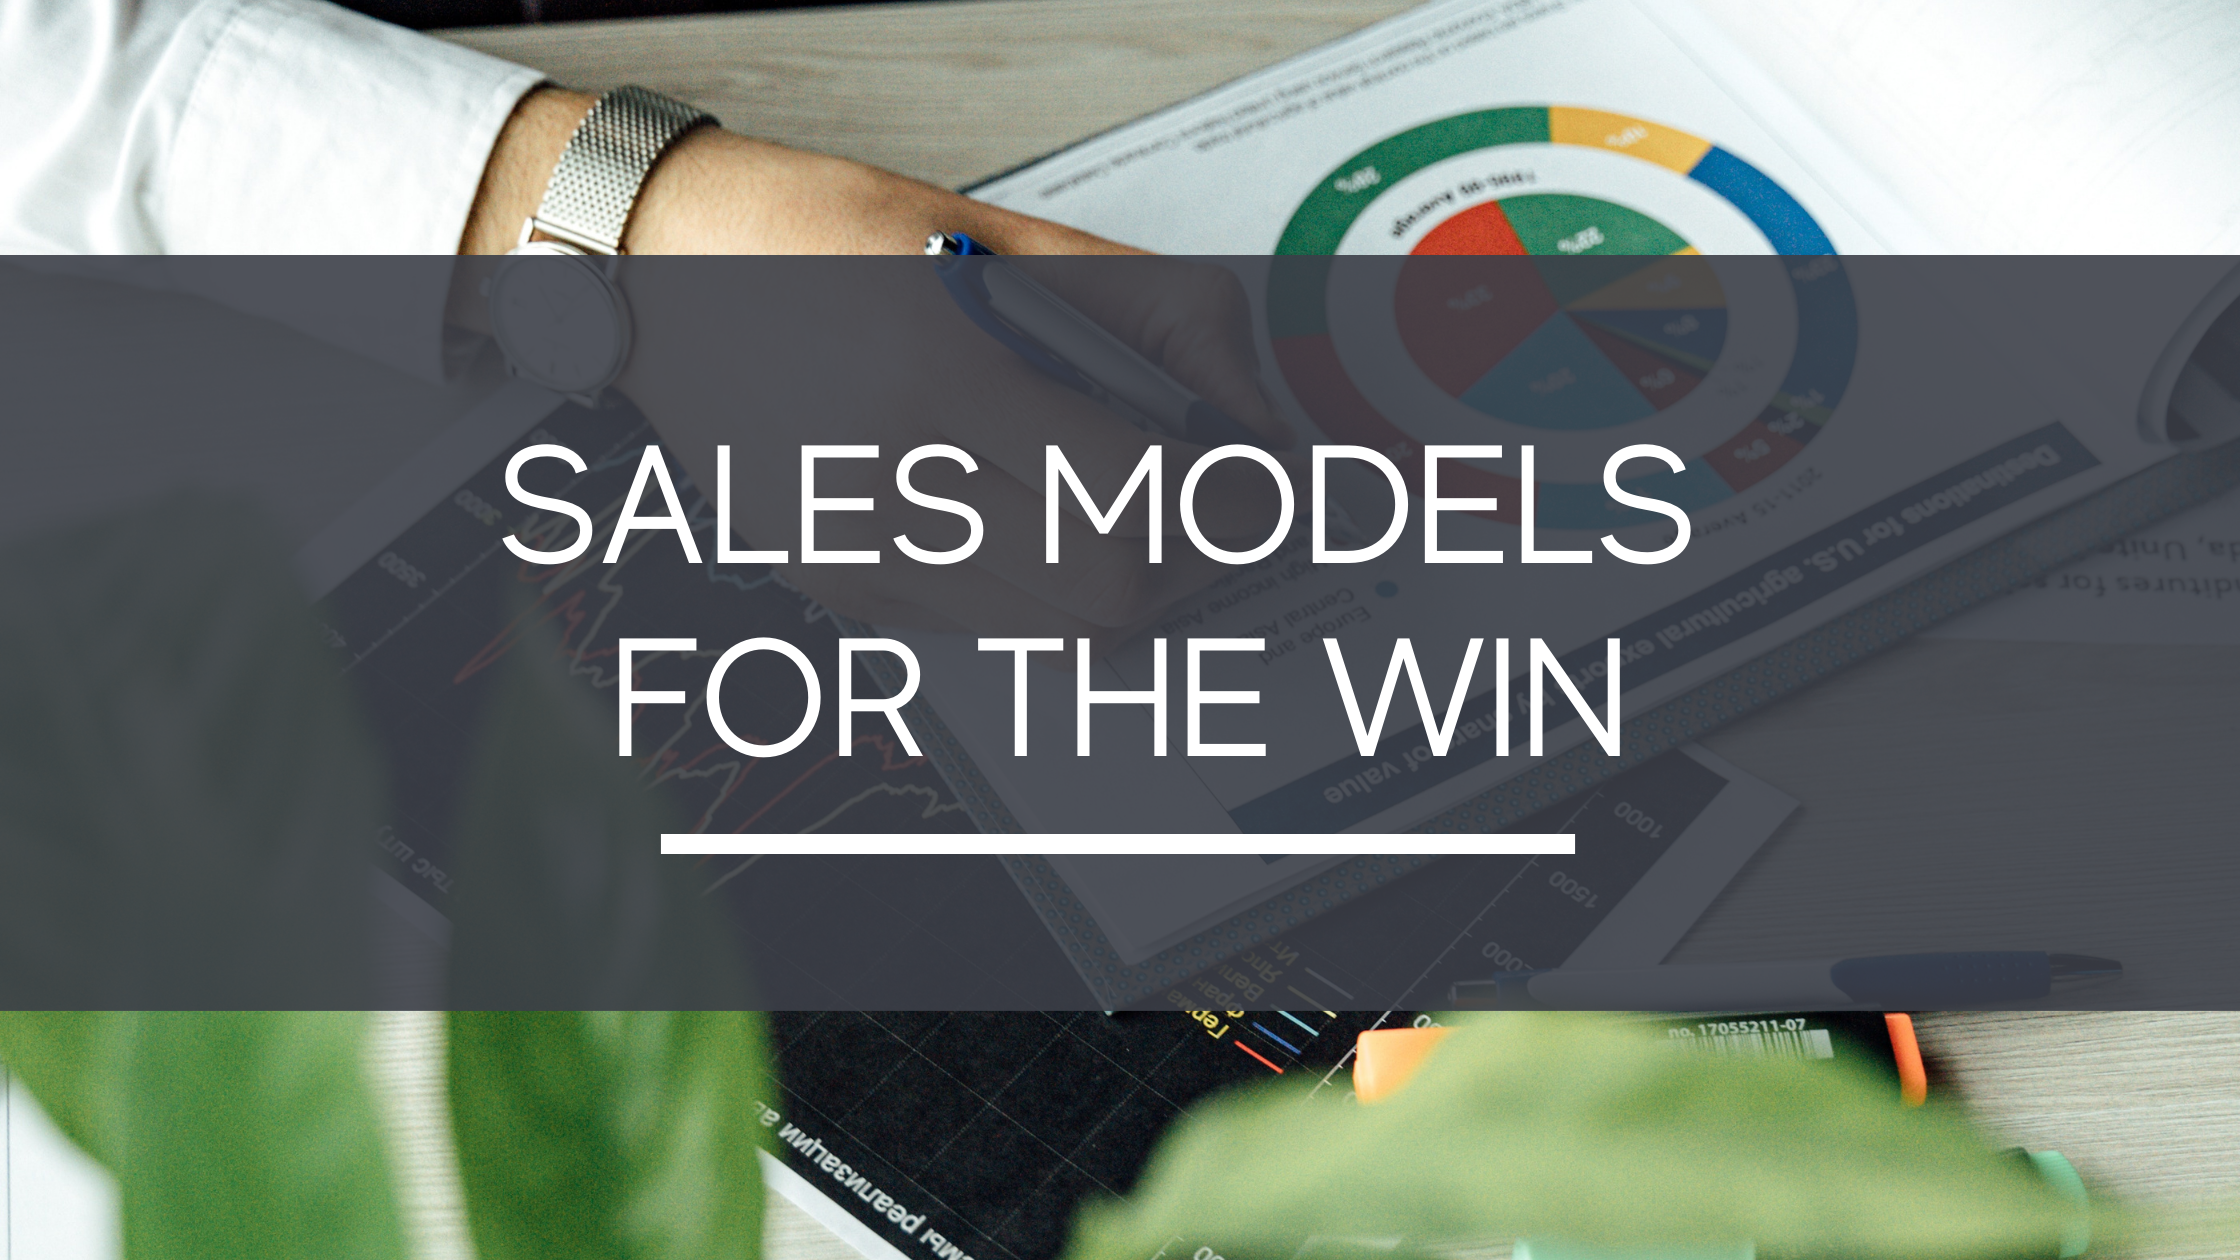 Sales Models for the Win - The Growth Manager